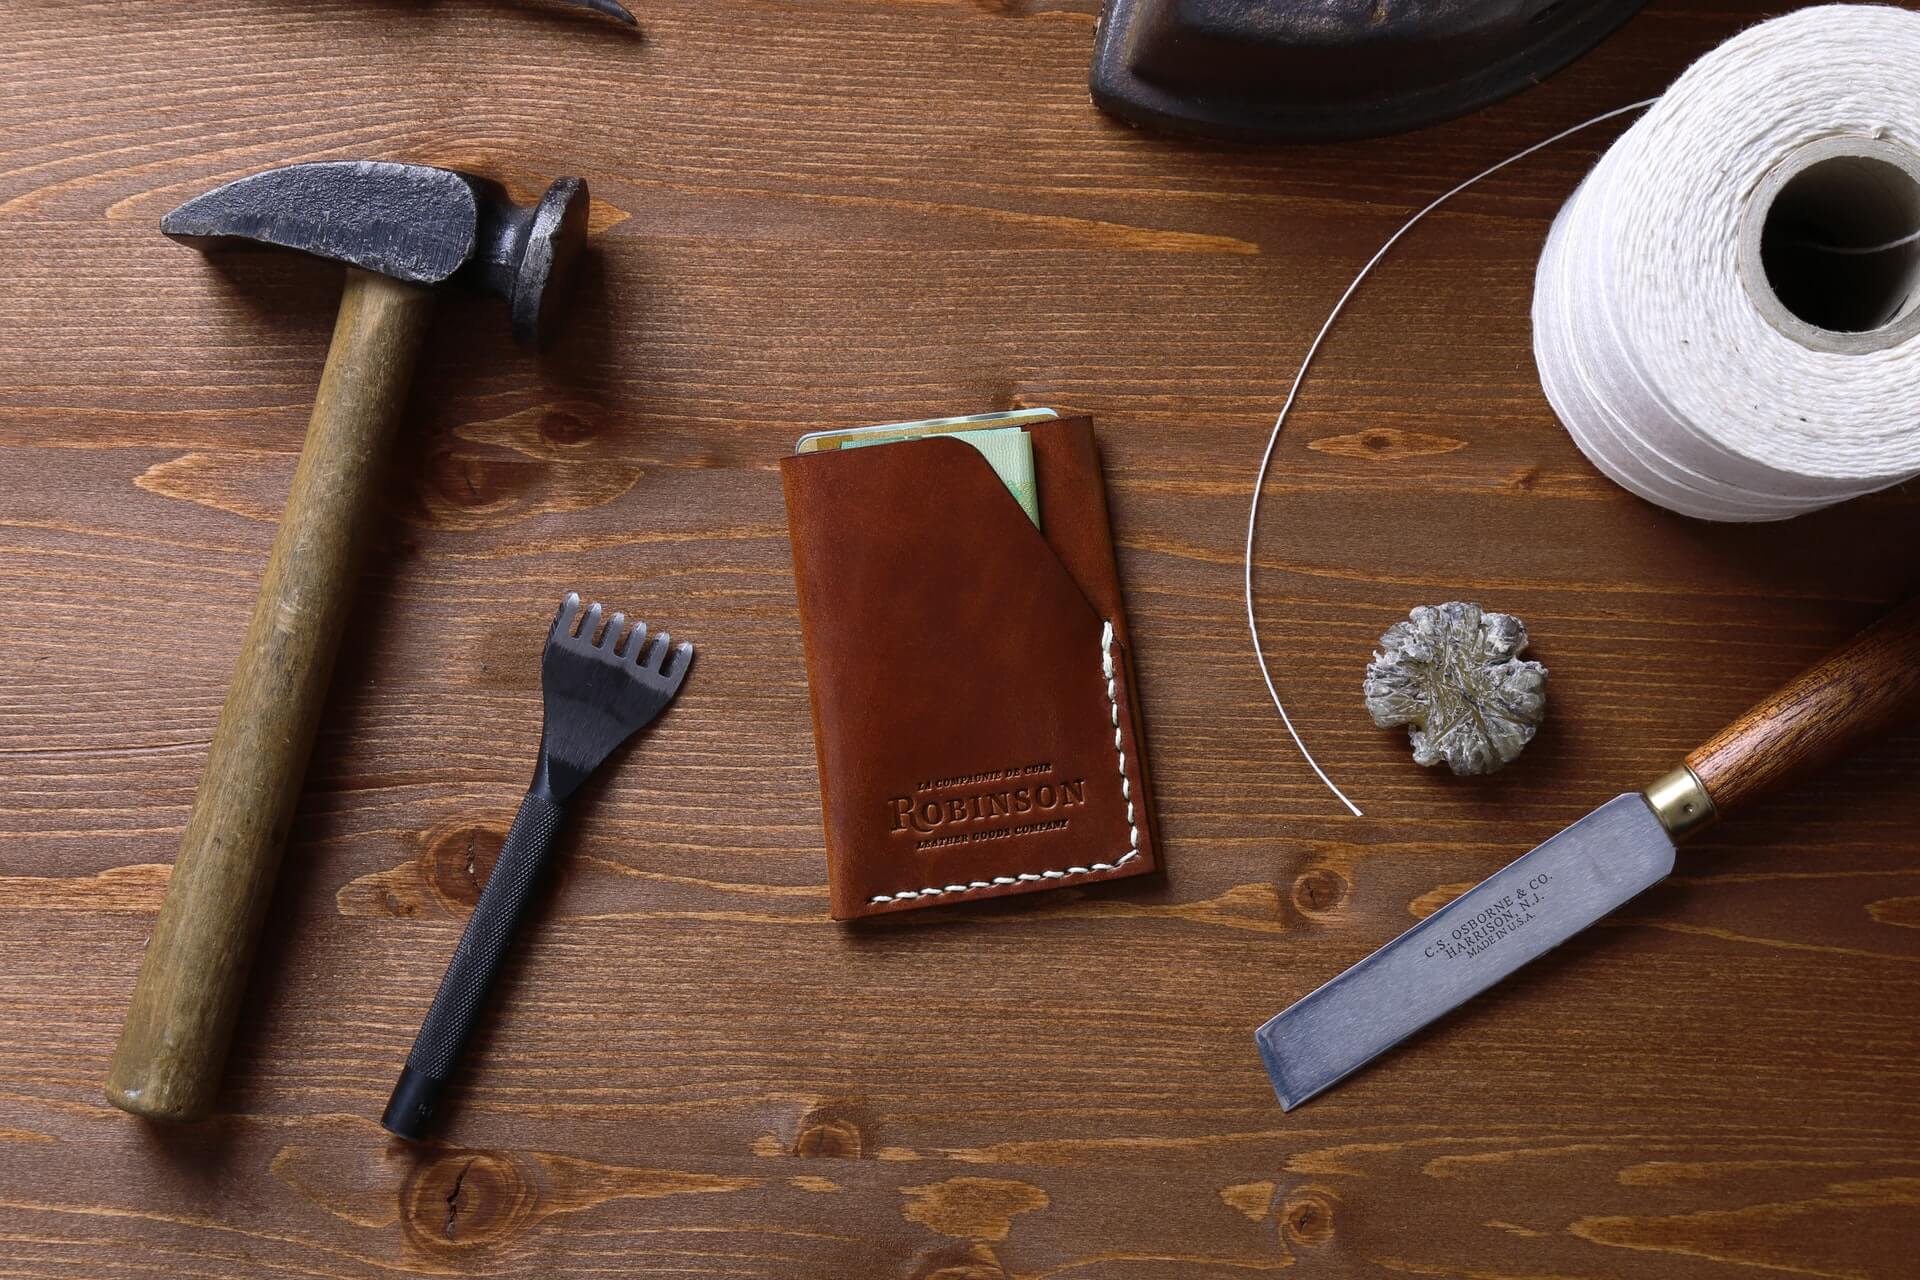 How You Can Start the Hobby of Leather Crafting in Your Home